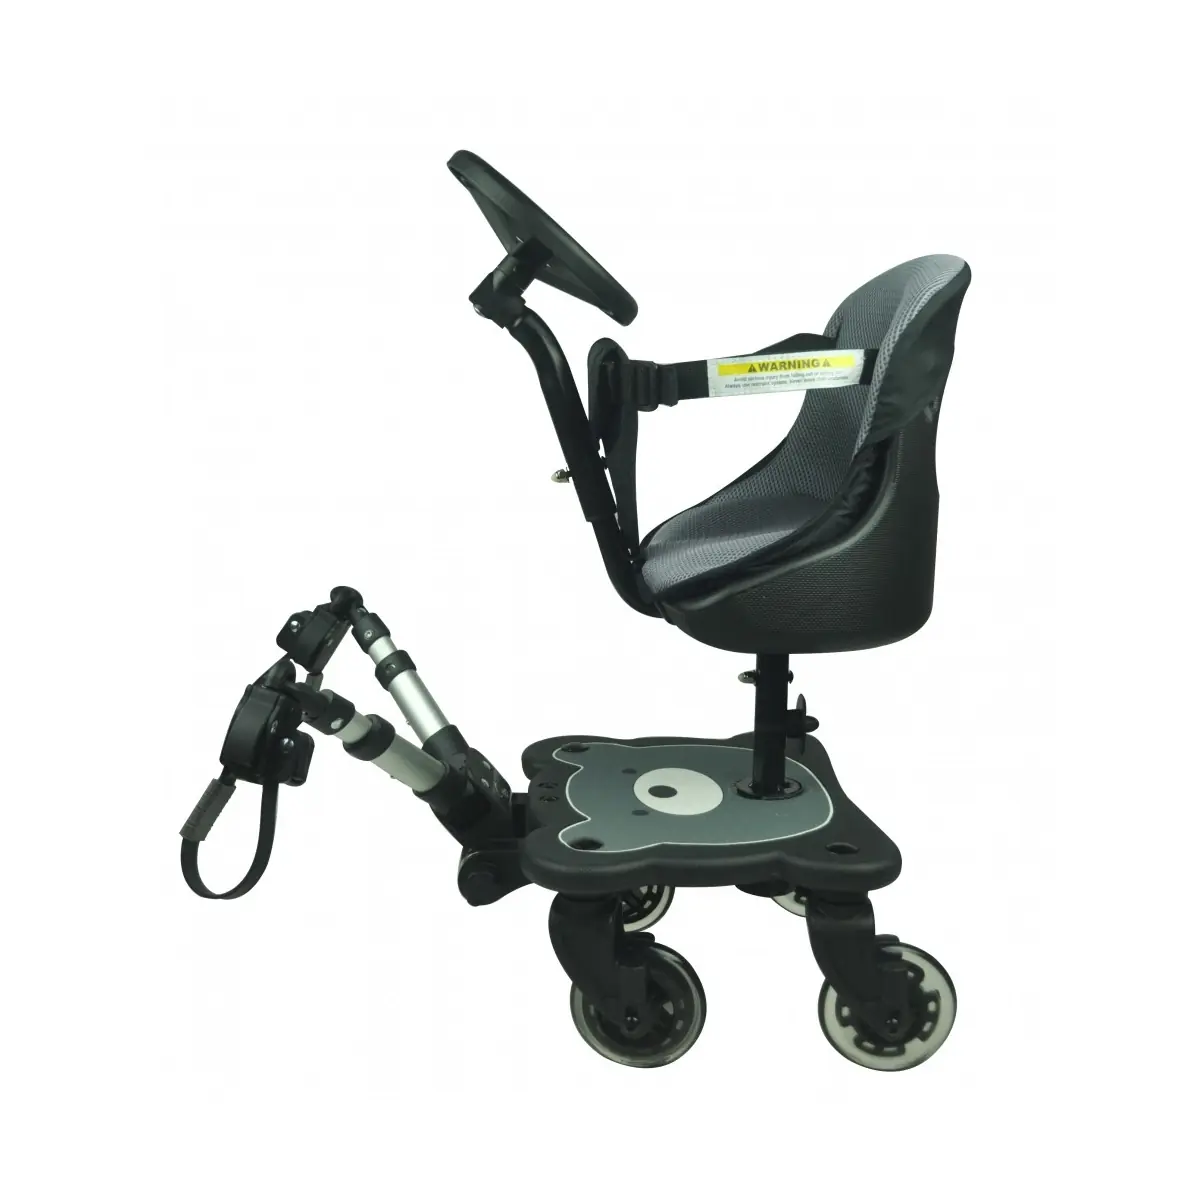 Image of Roma 4 Rider Toddler Seat and Ride On Board (NEW)